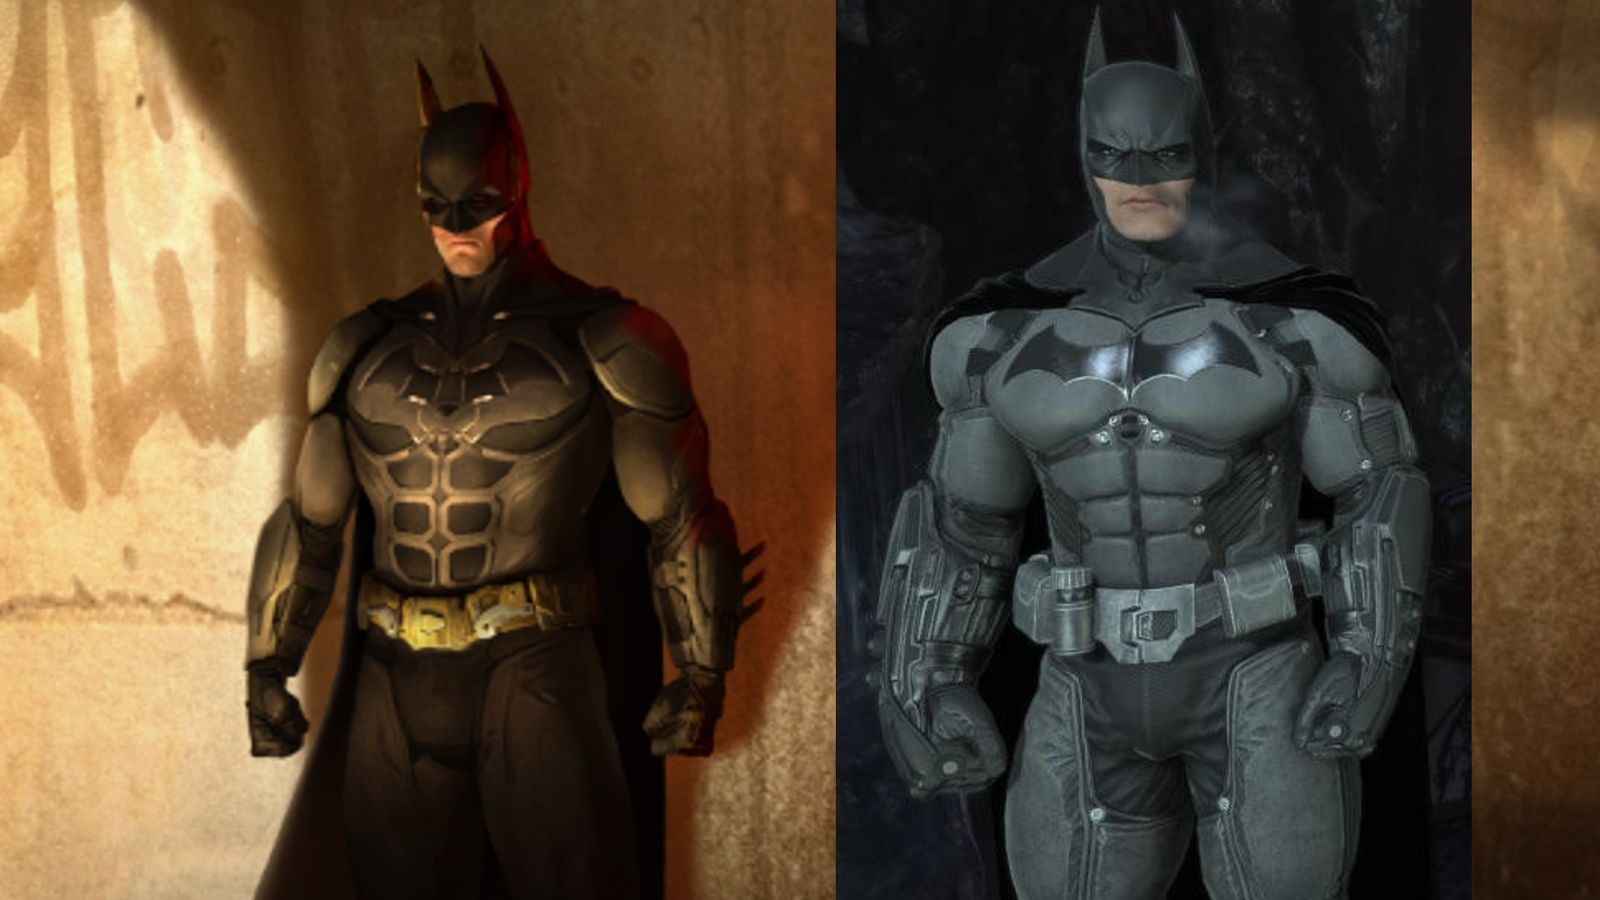 Arkham Shadow key art with Batman standing in front of a wall, next to an image of Batman from Arkham Origins